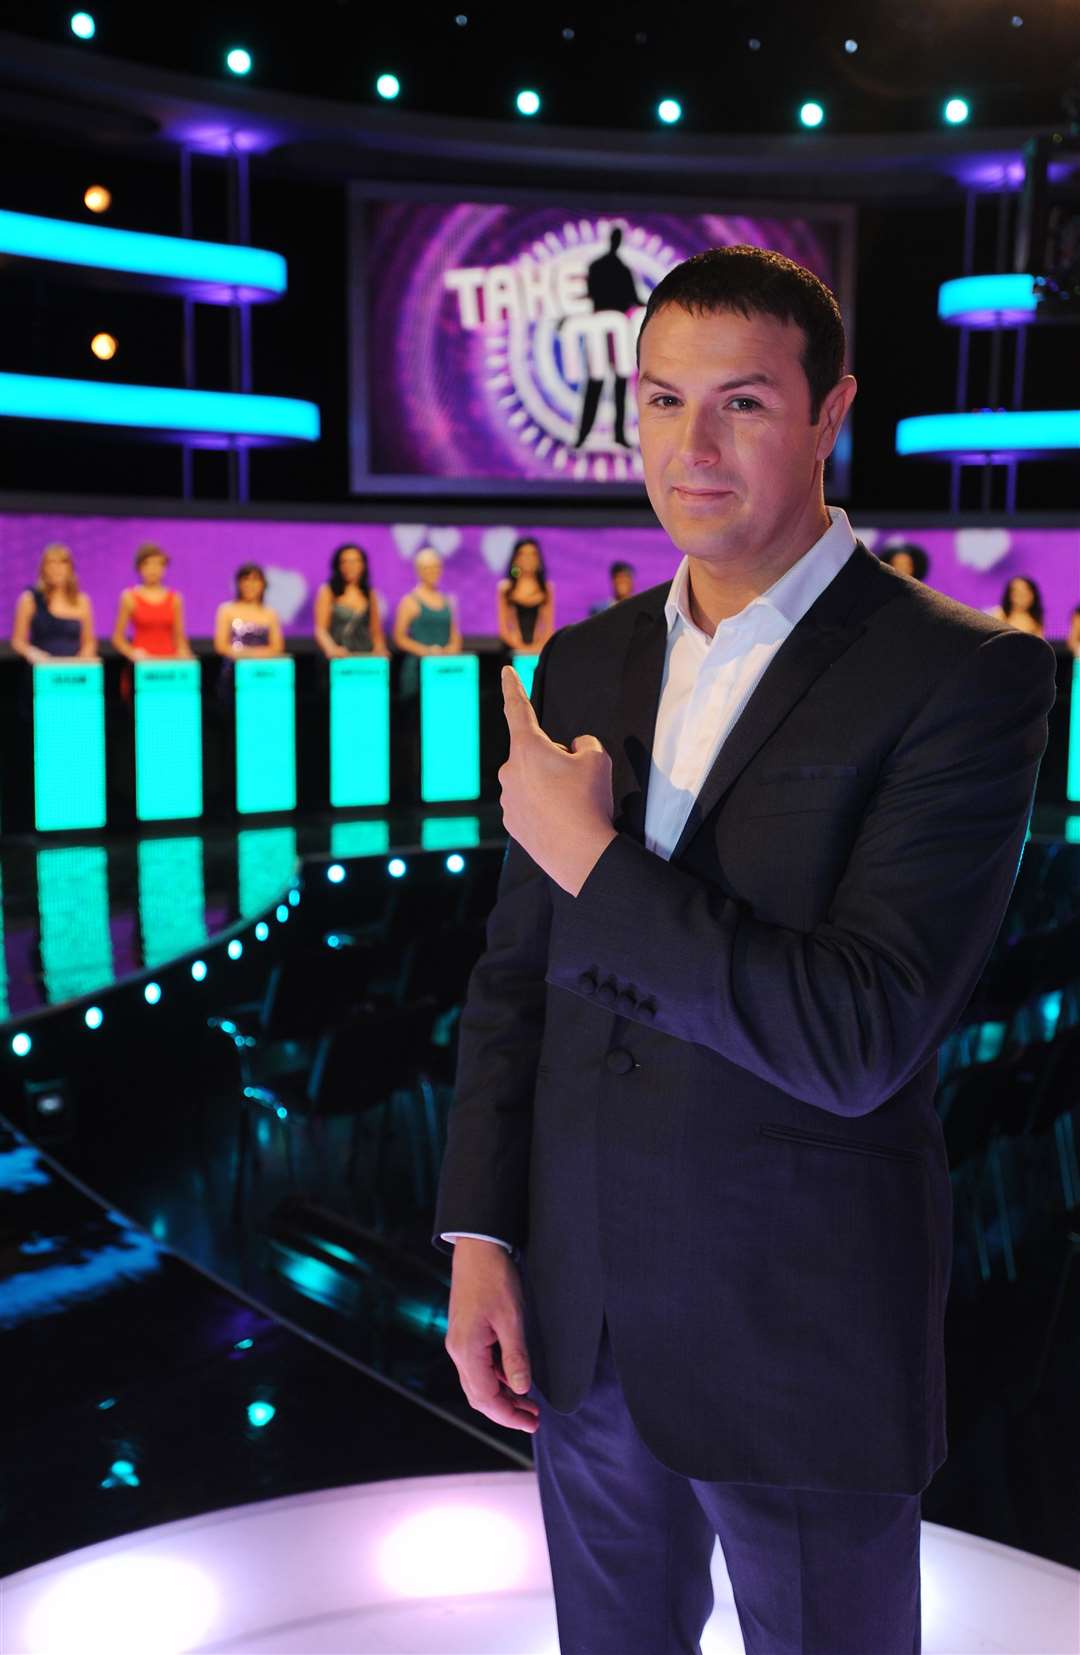 Paddy McGuinness, presenter of Take Me Out, filmed at Maidstone Studios. Credit: Talkback Thames